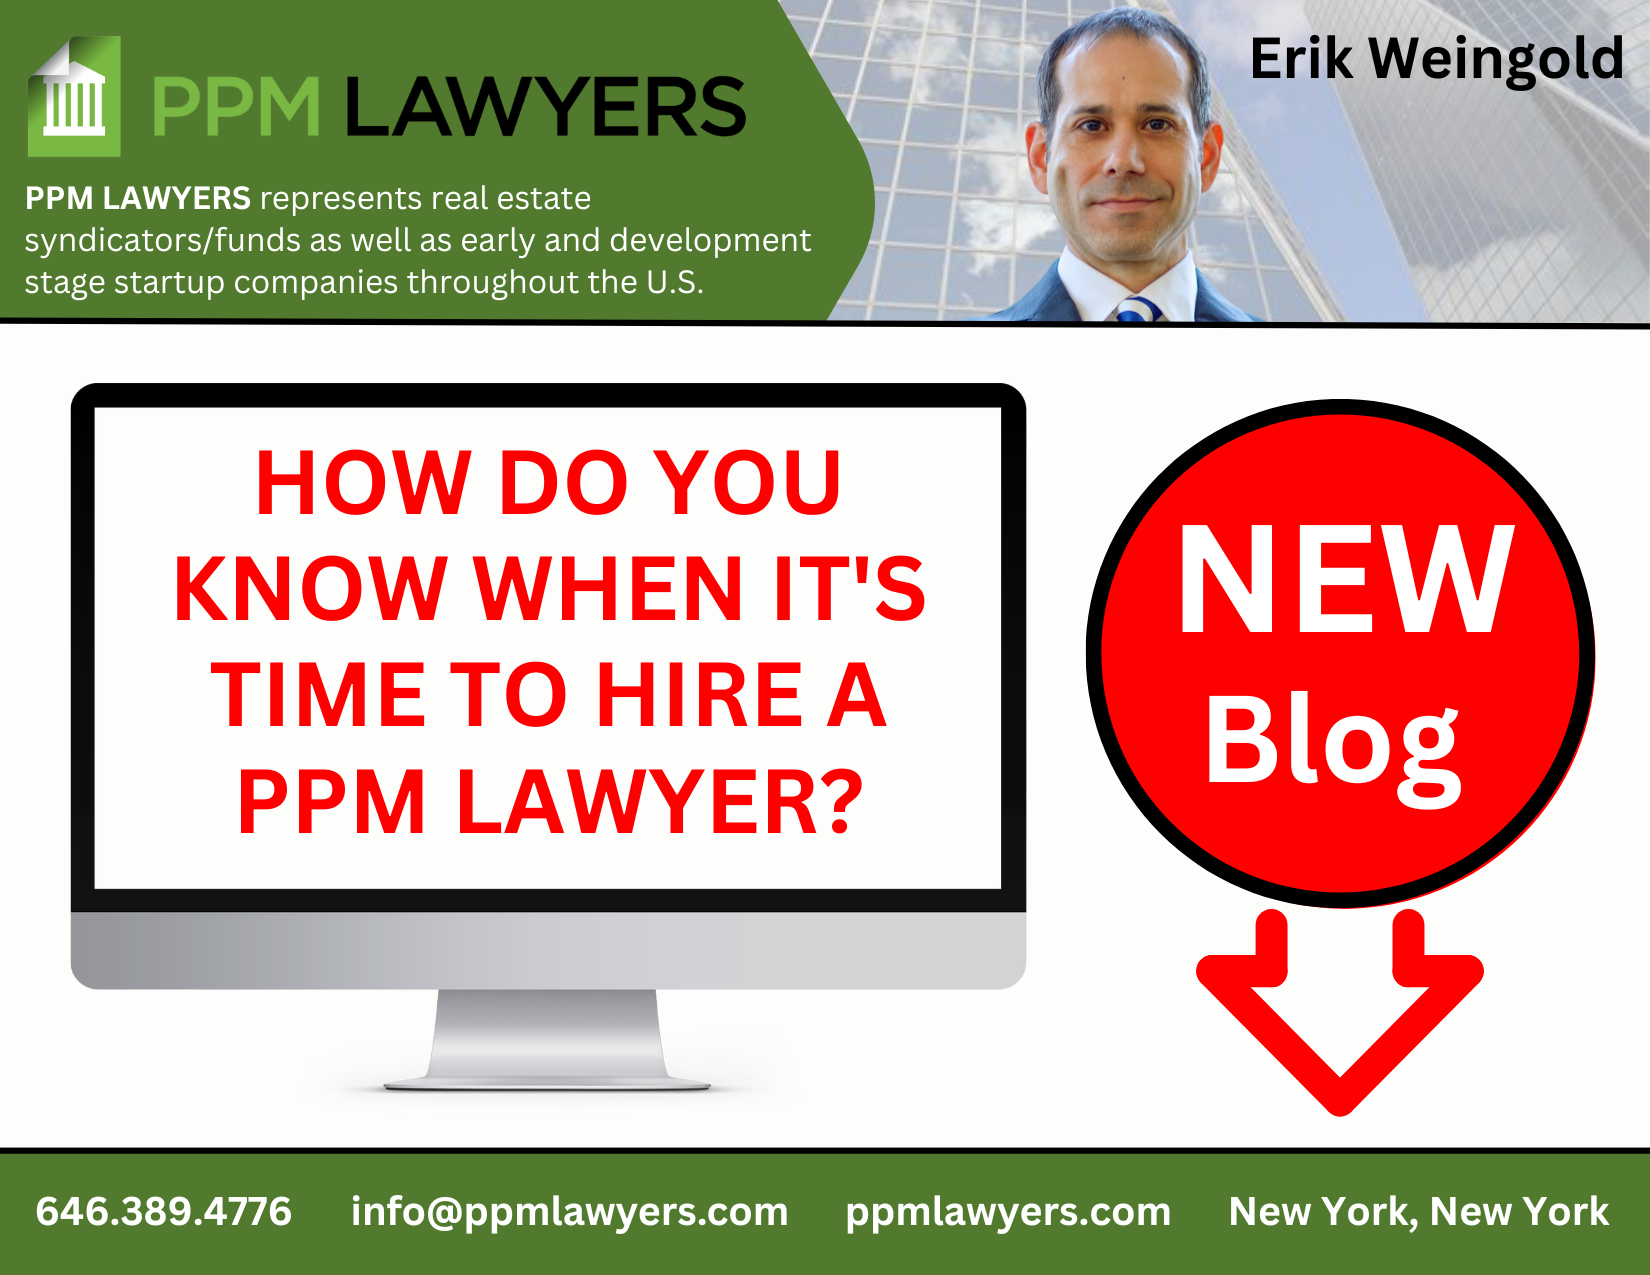 Hire a PPM Lawyer